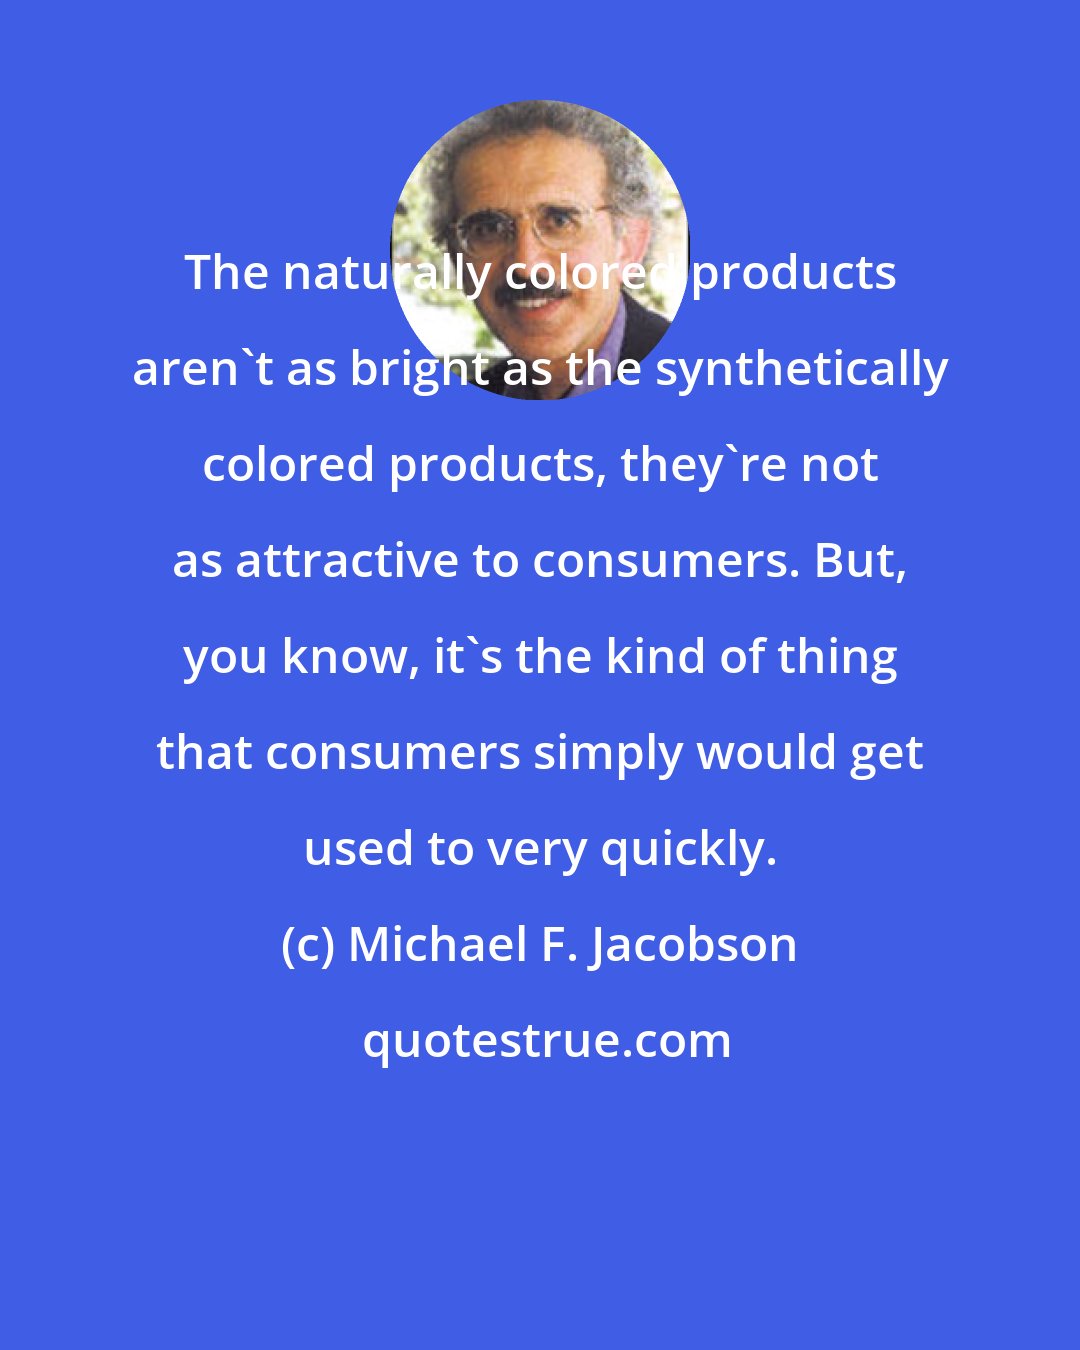 Michael F. Jacobson: The naturally colored products aren't as bright as the synthetically colored products, they're not as attractive to consumers. But, you know, it's the kind of thing that consumers simply would get used to very quickly.